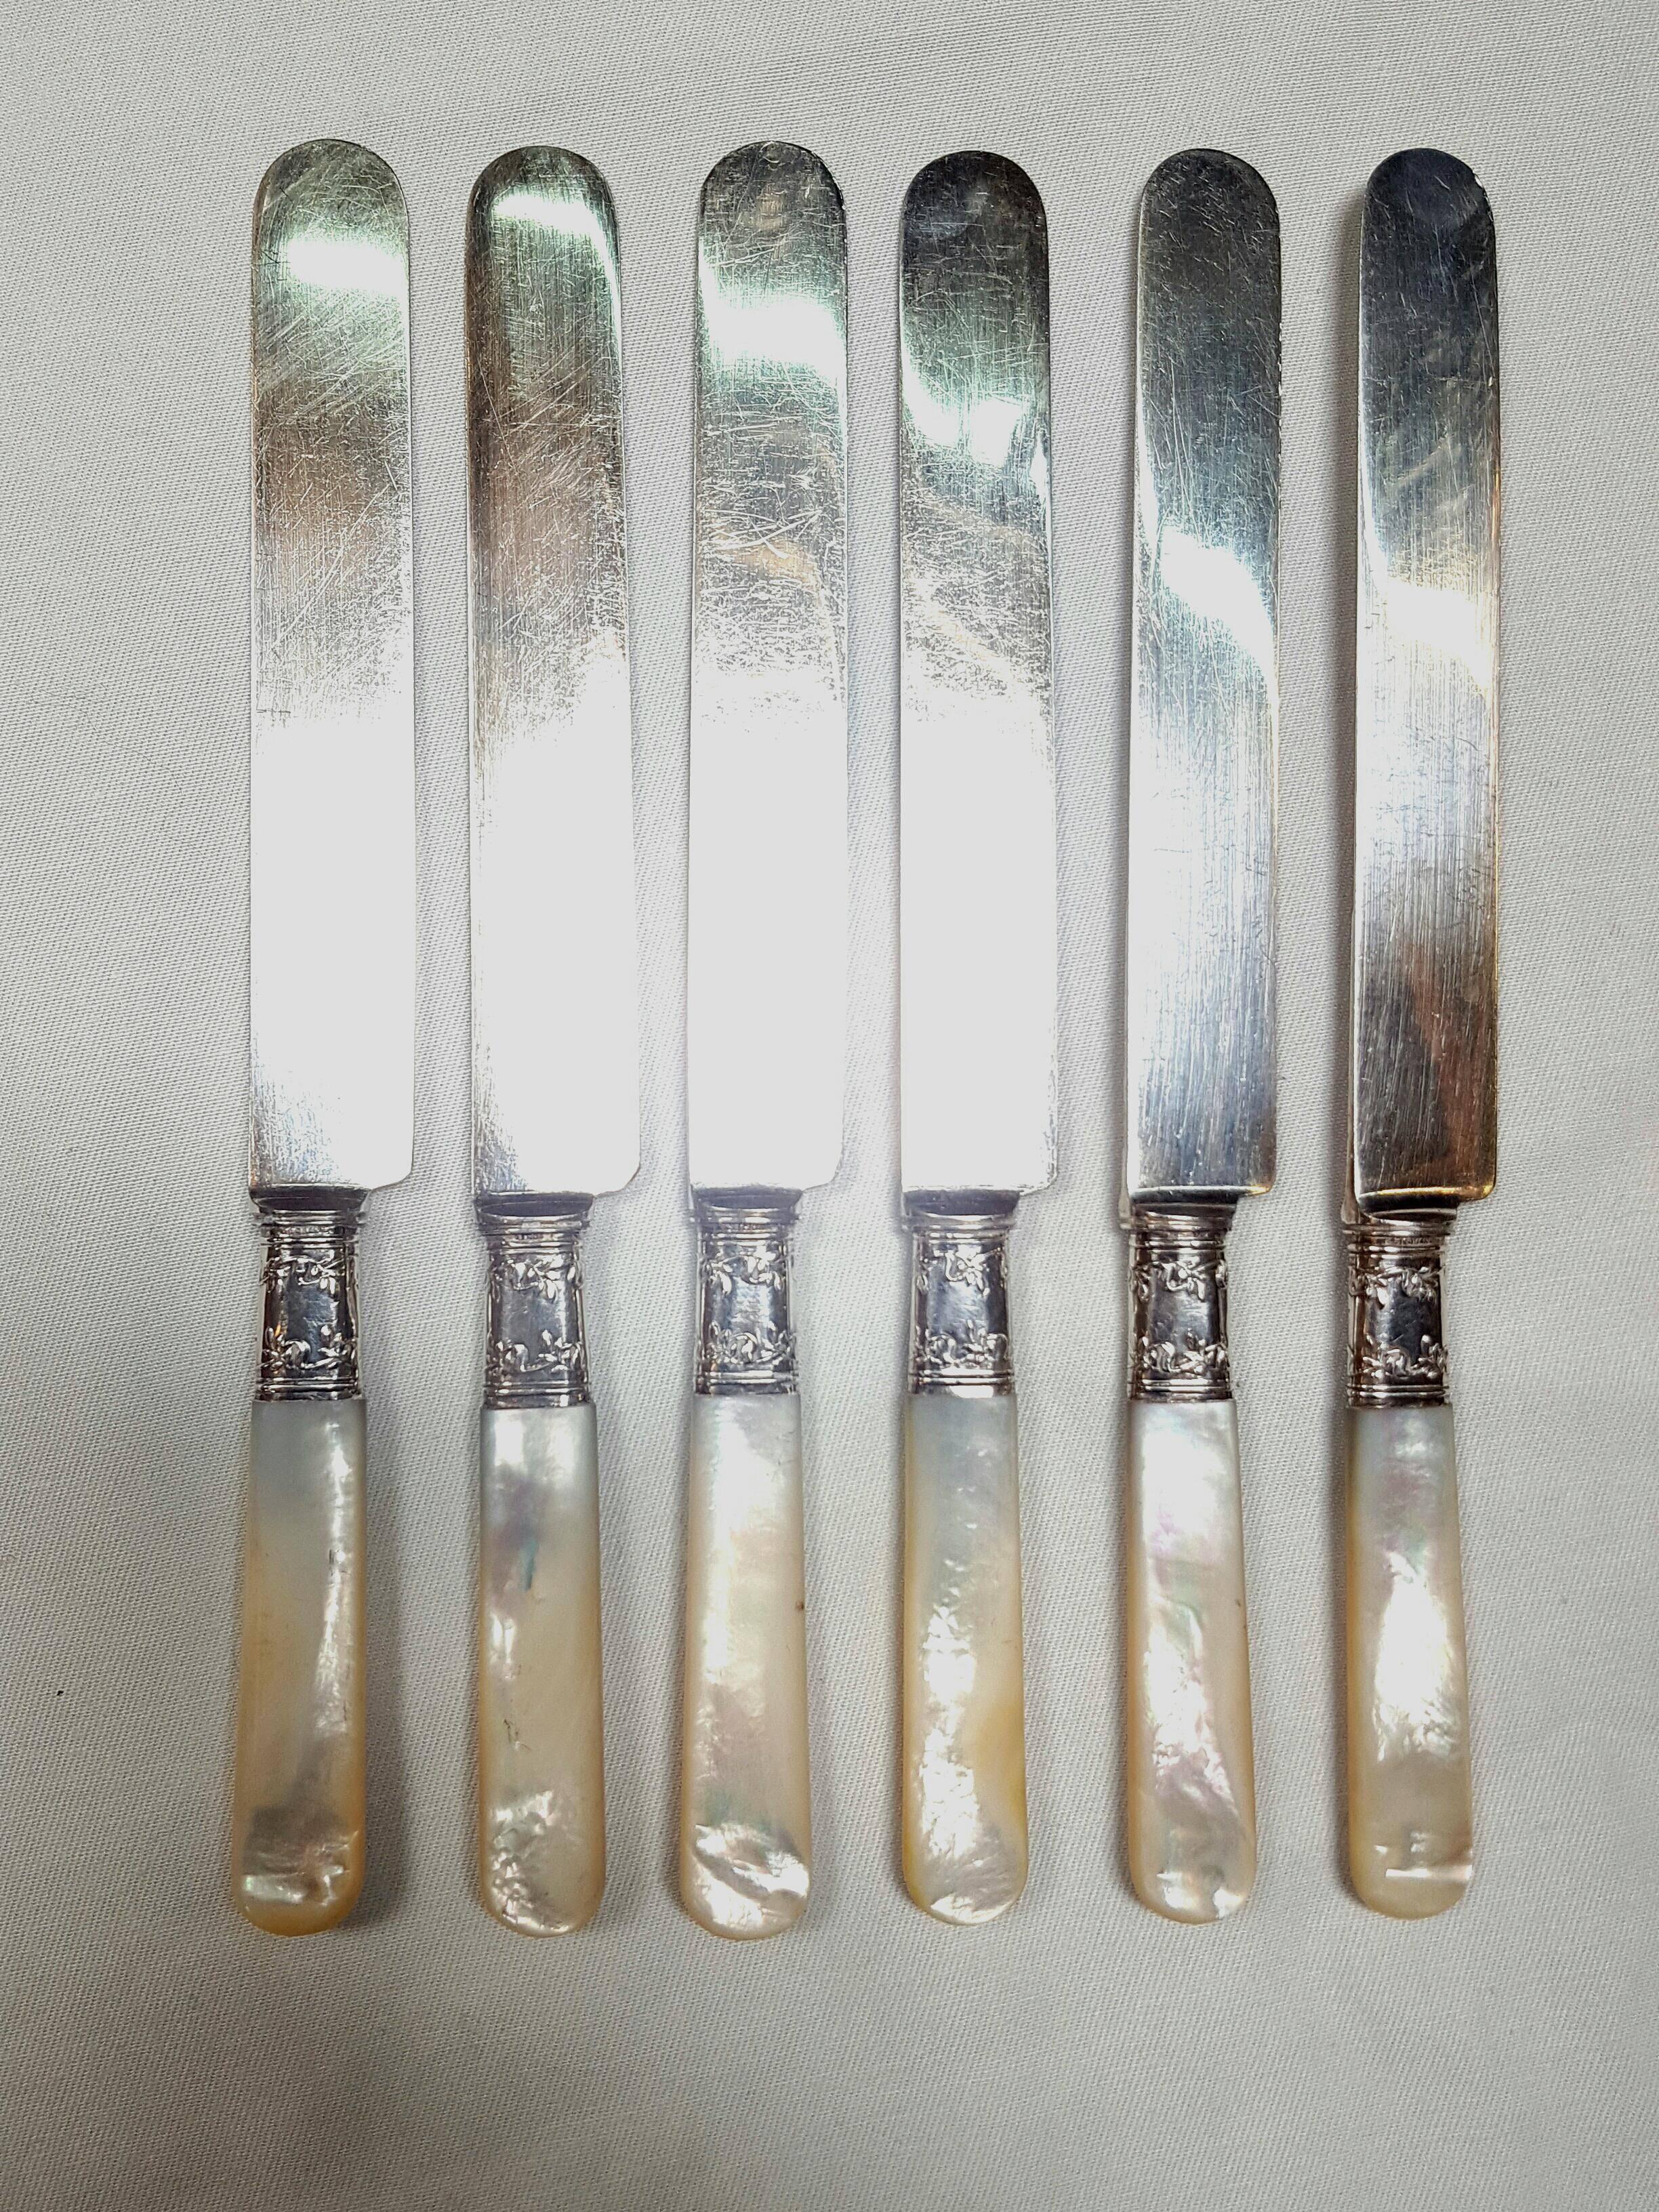 antique mother of pearl handled silverware